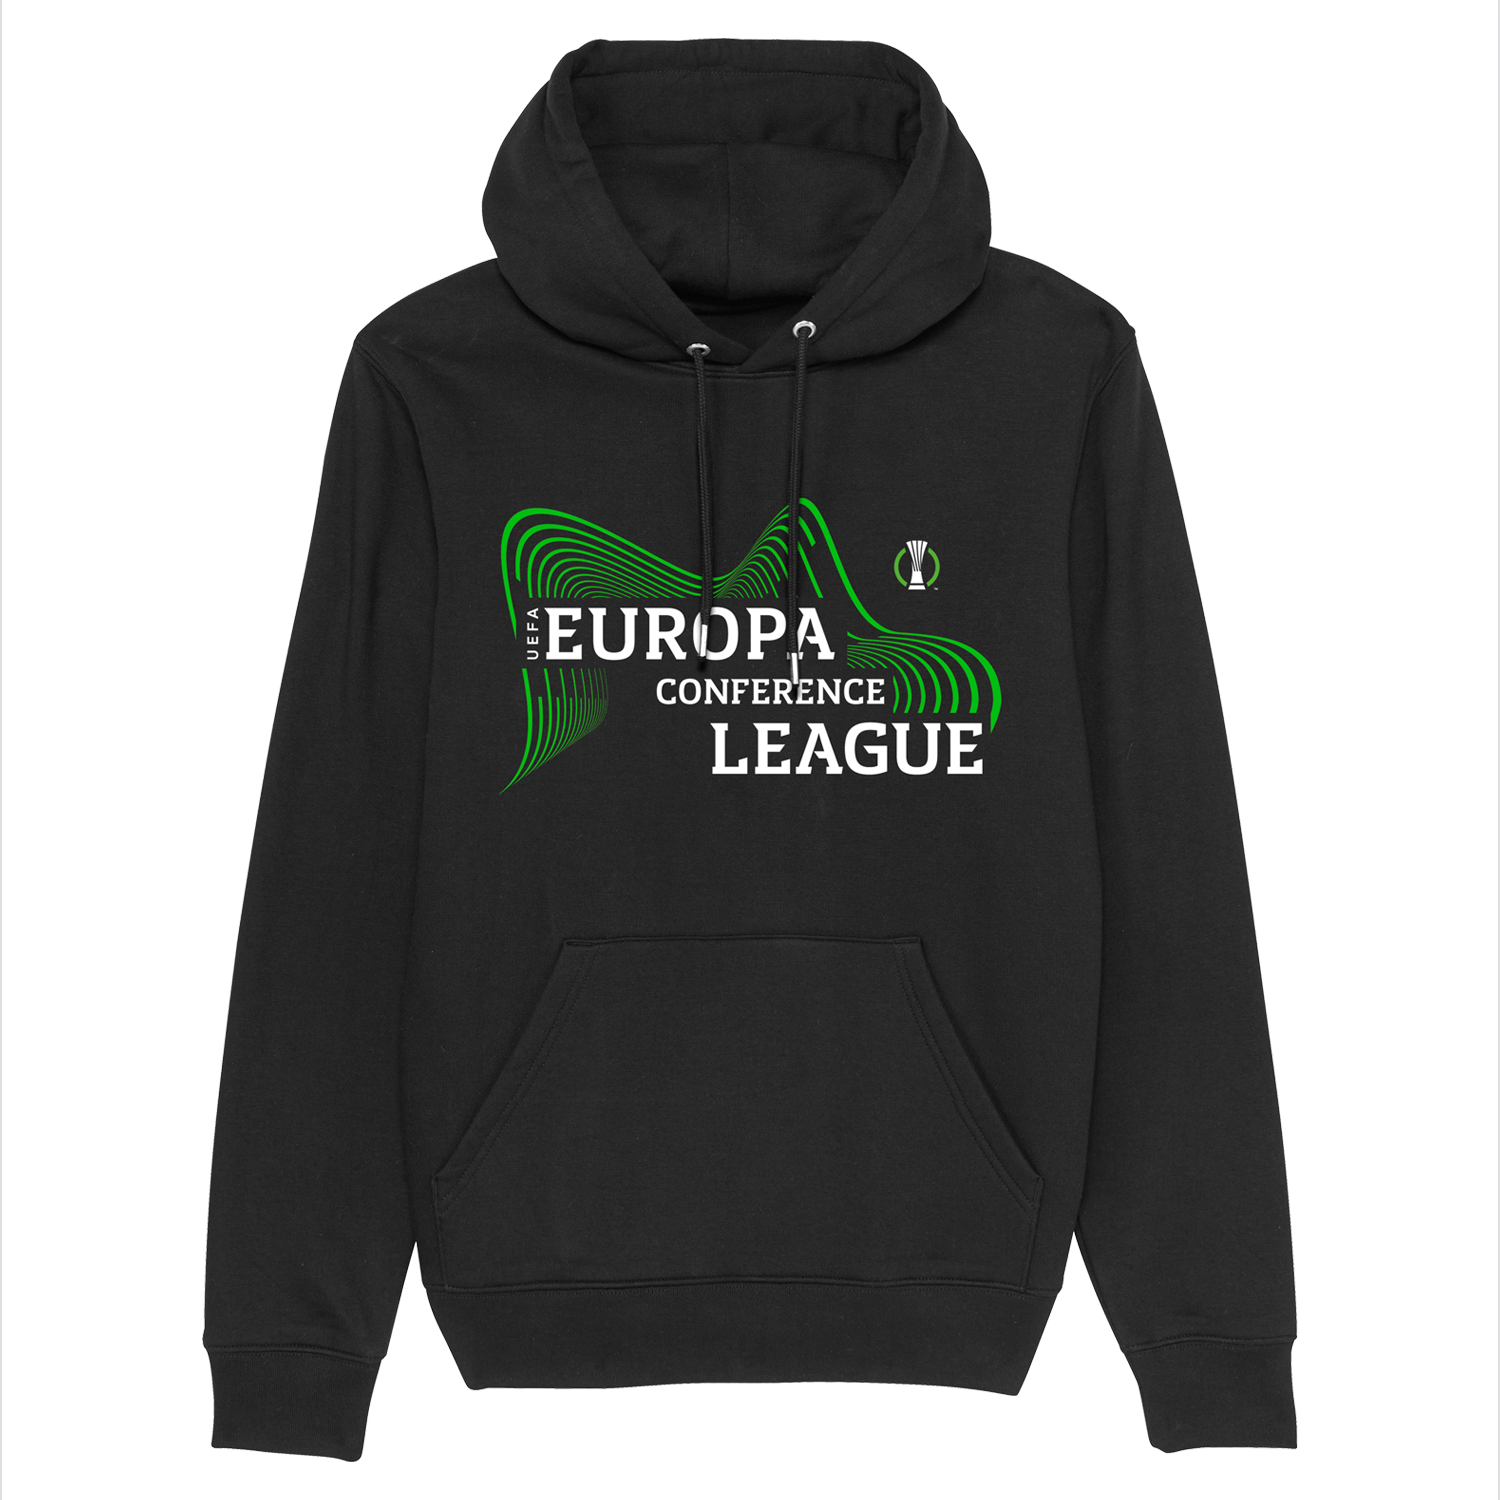 UEFA Europa Conference League - Energy Wave Black Hoodie UEFA Club Competitions Online Store